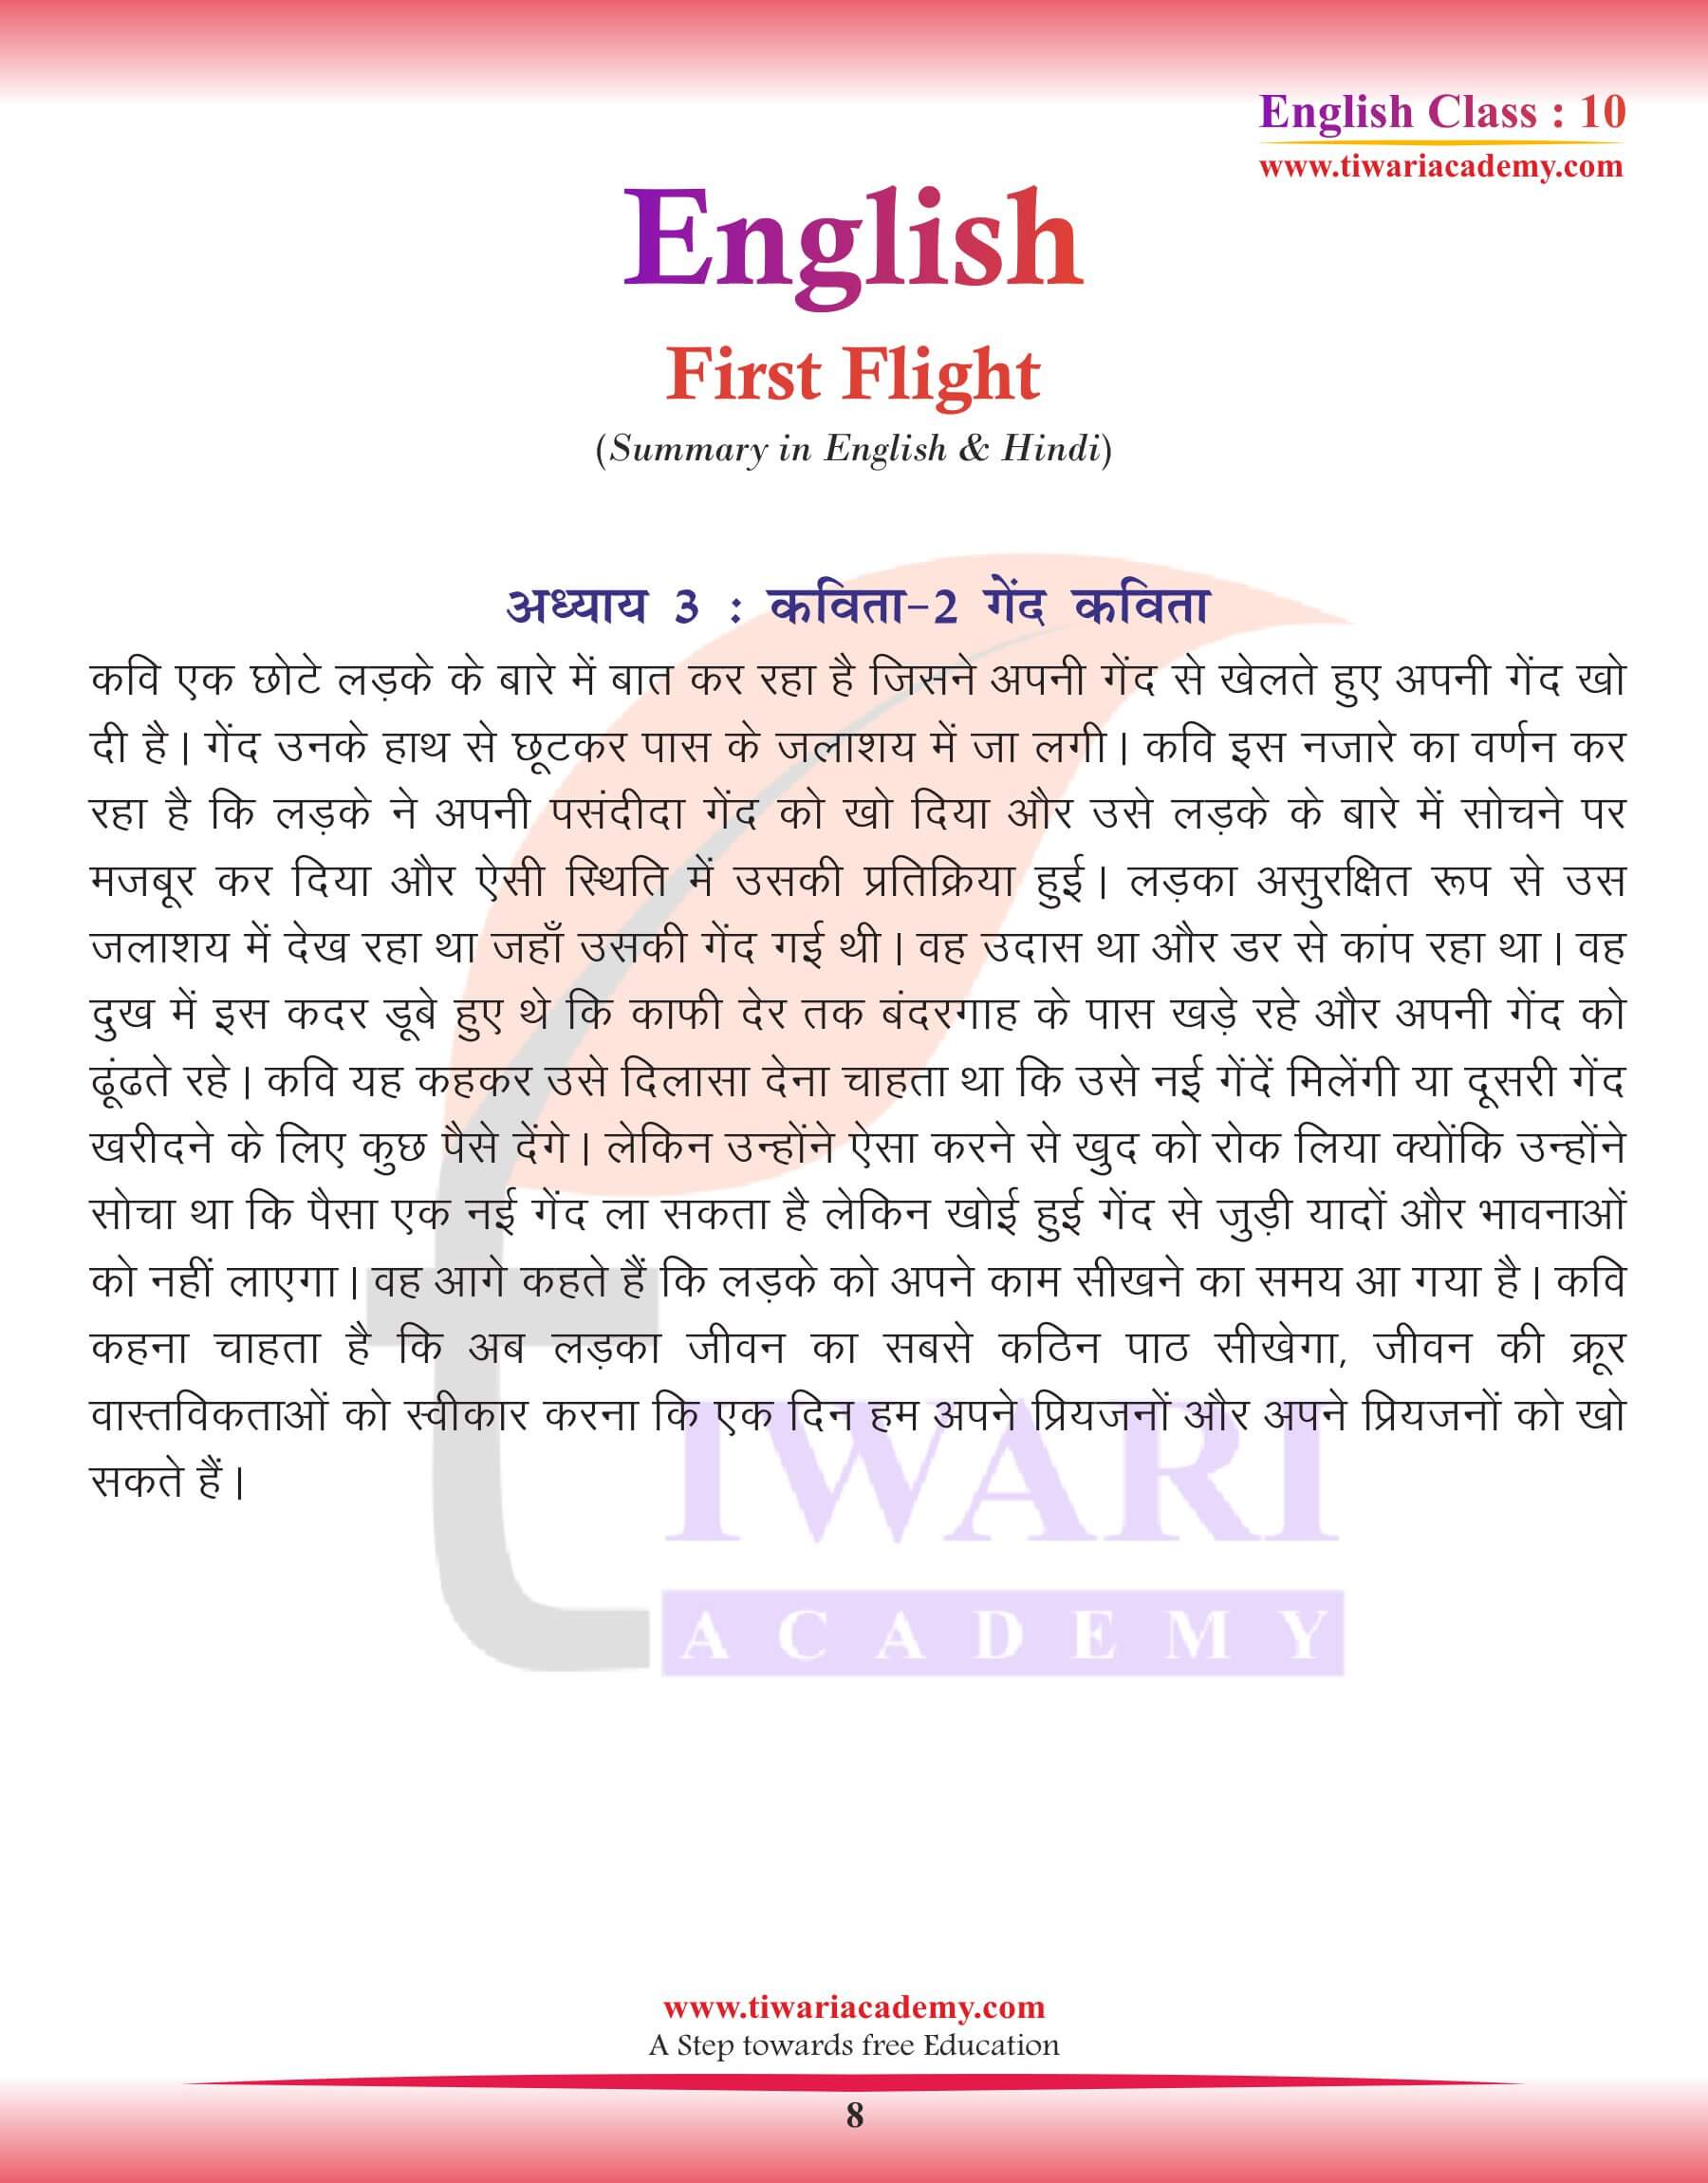 Class 10 English Chapter 3 Summary Poem in Hindi